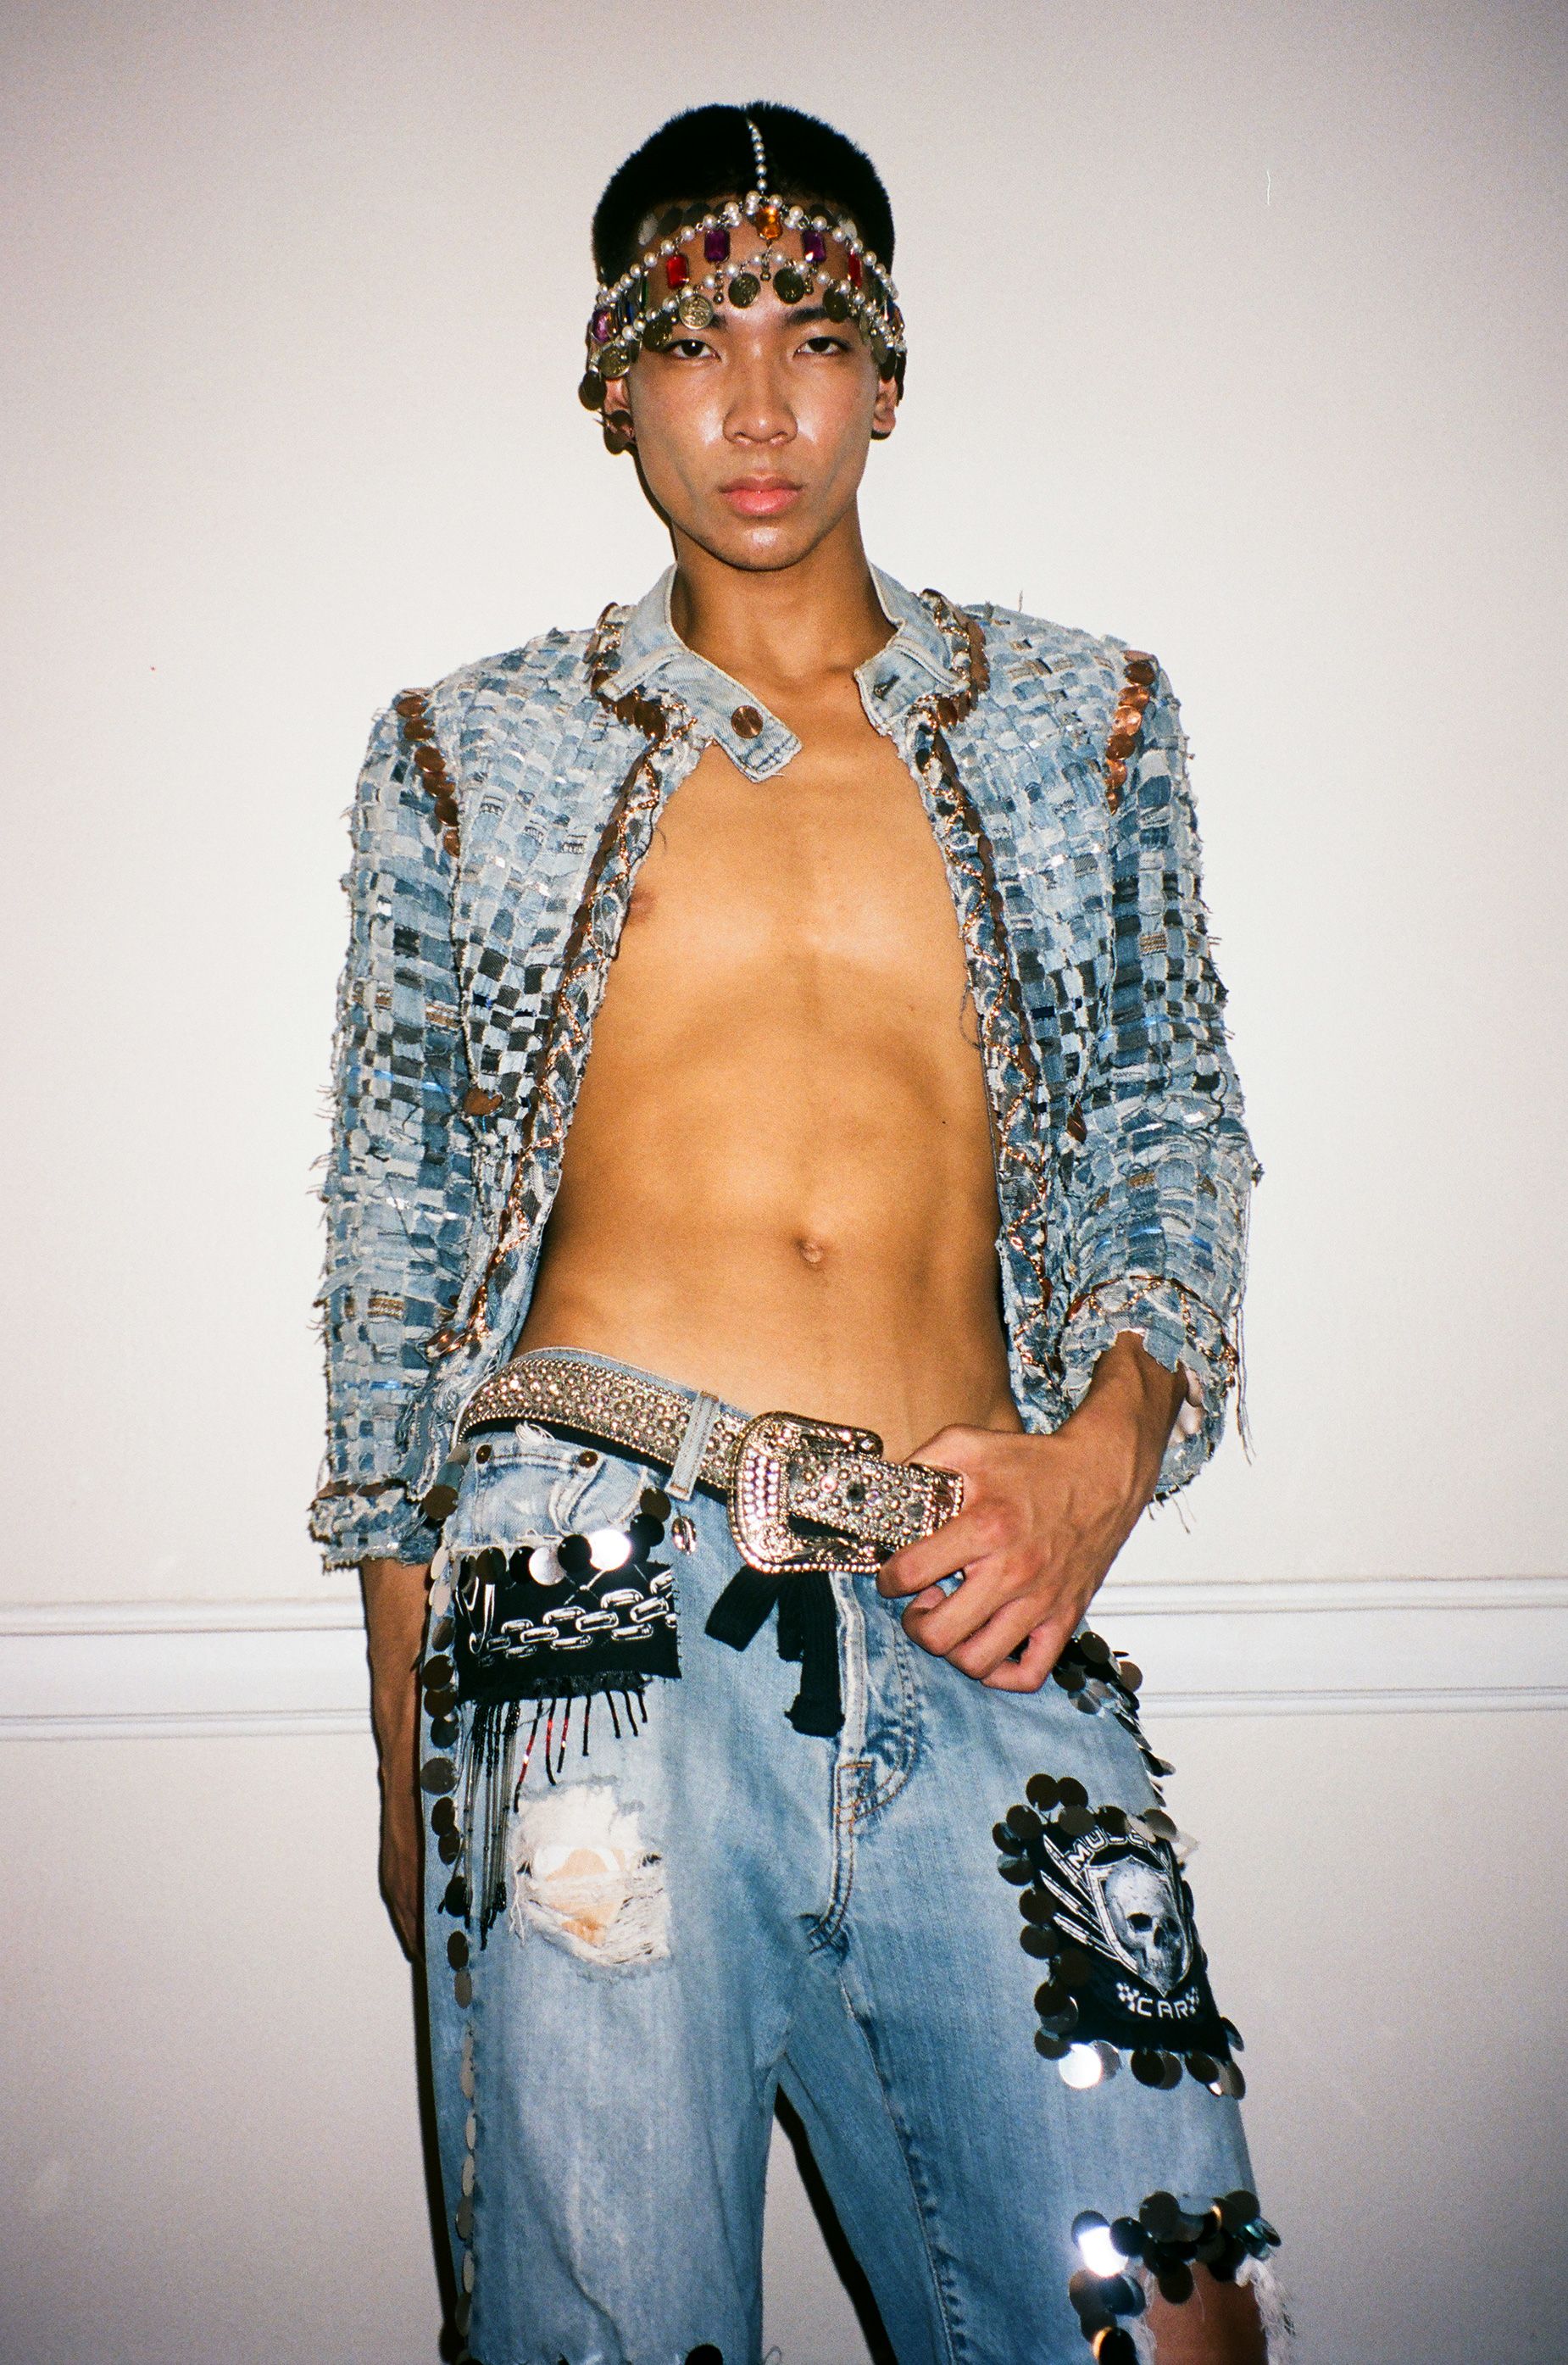 In addition to intricate, embellished denim pieces, Uribe highlighted his take on Zoot suits and a series of gowns featuring basketball net weaving as emblematic of the brand's aesthetic past, present and future.